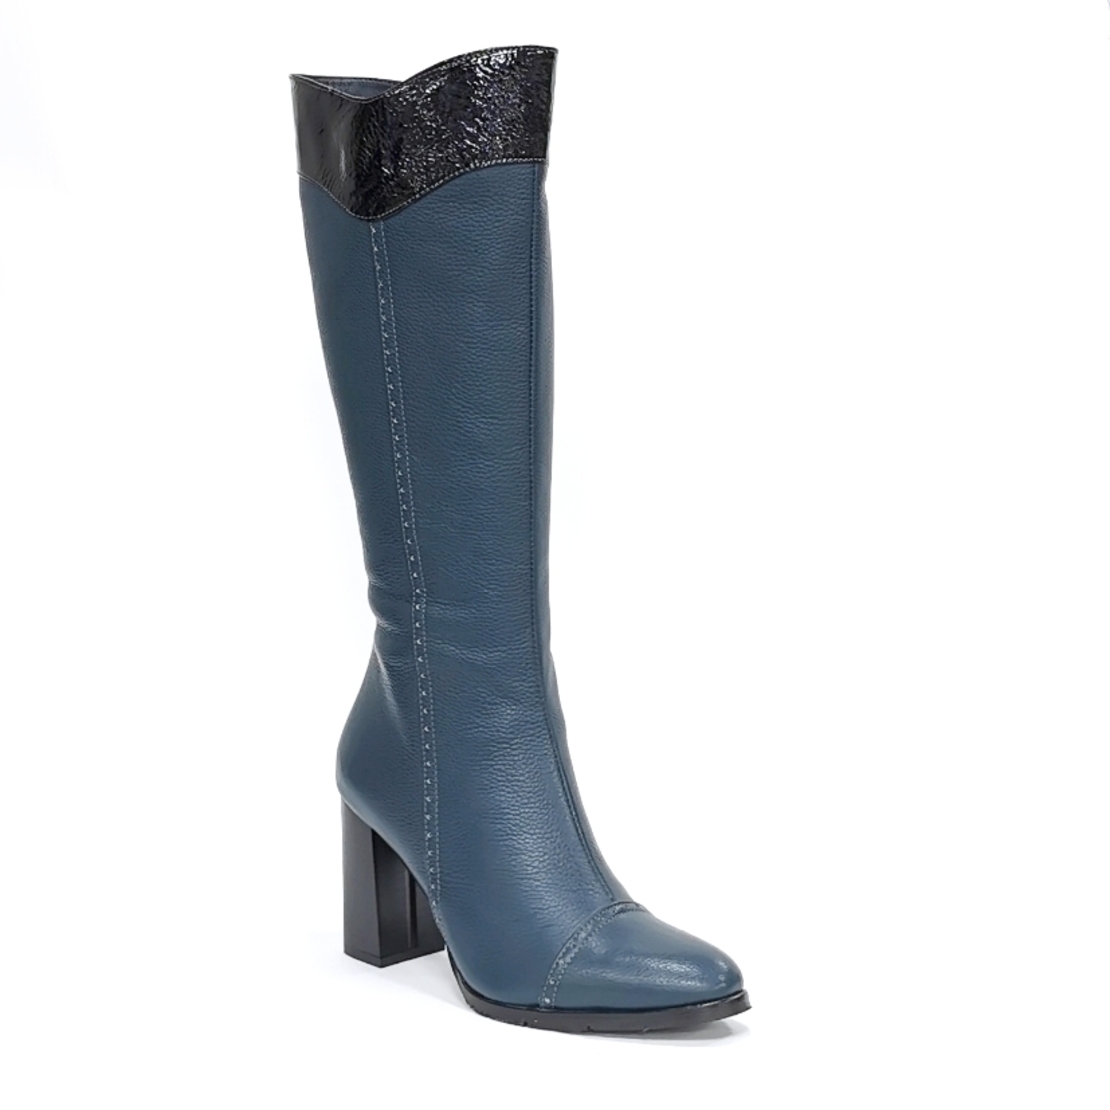 Women's elegant boots made of natural leather in the color blue/7945153